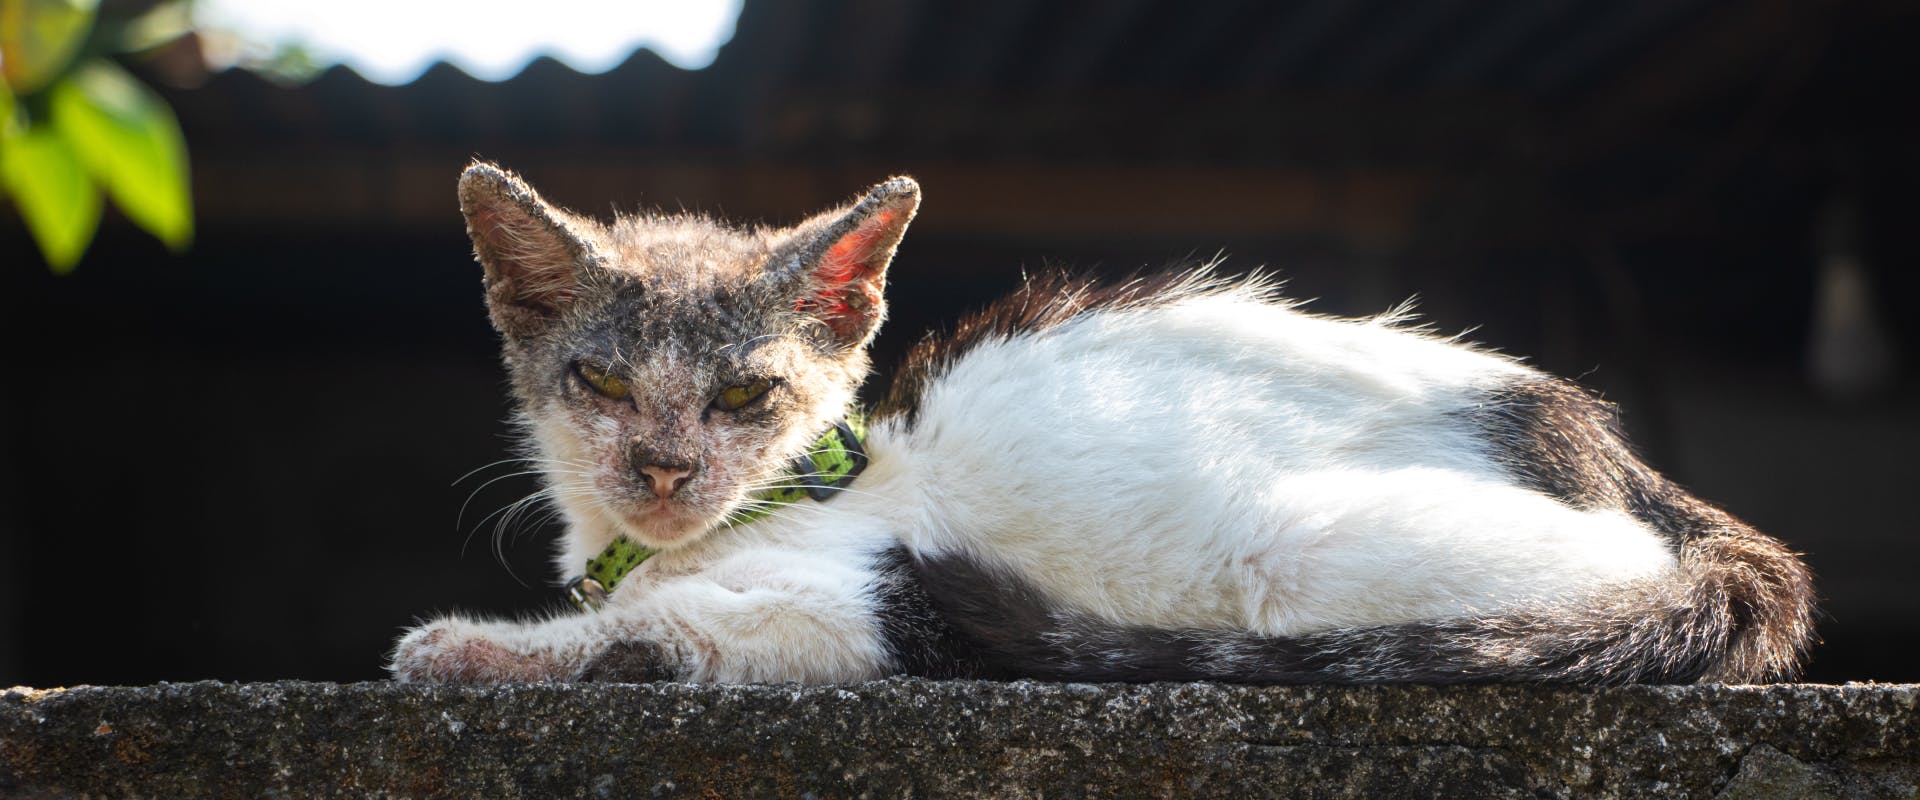 a kitten with a green collar lying on a stone wall with mange on its face